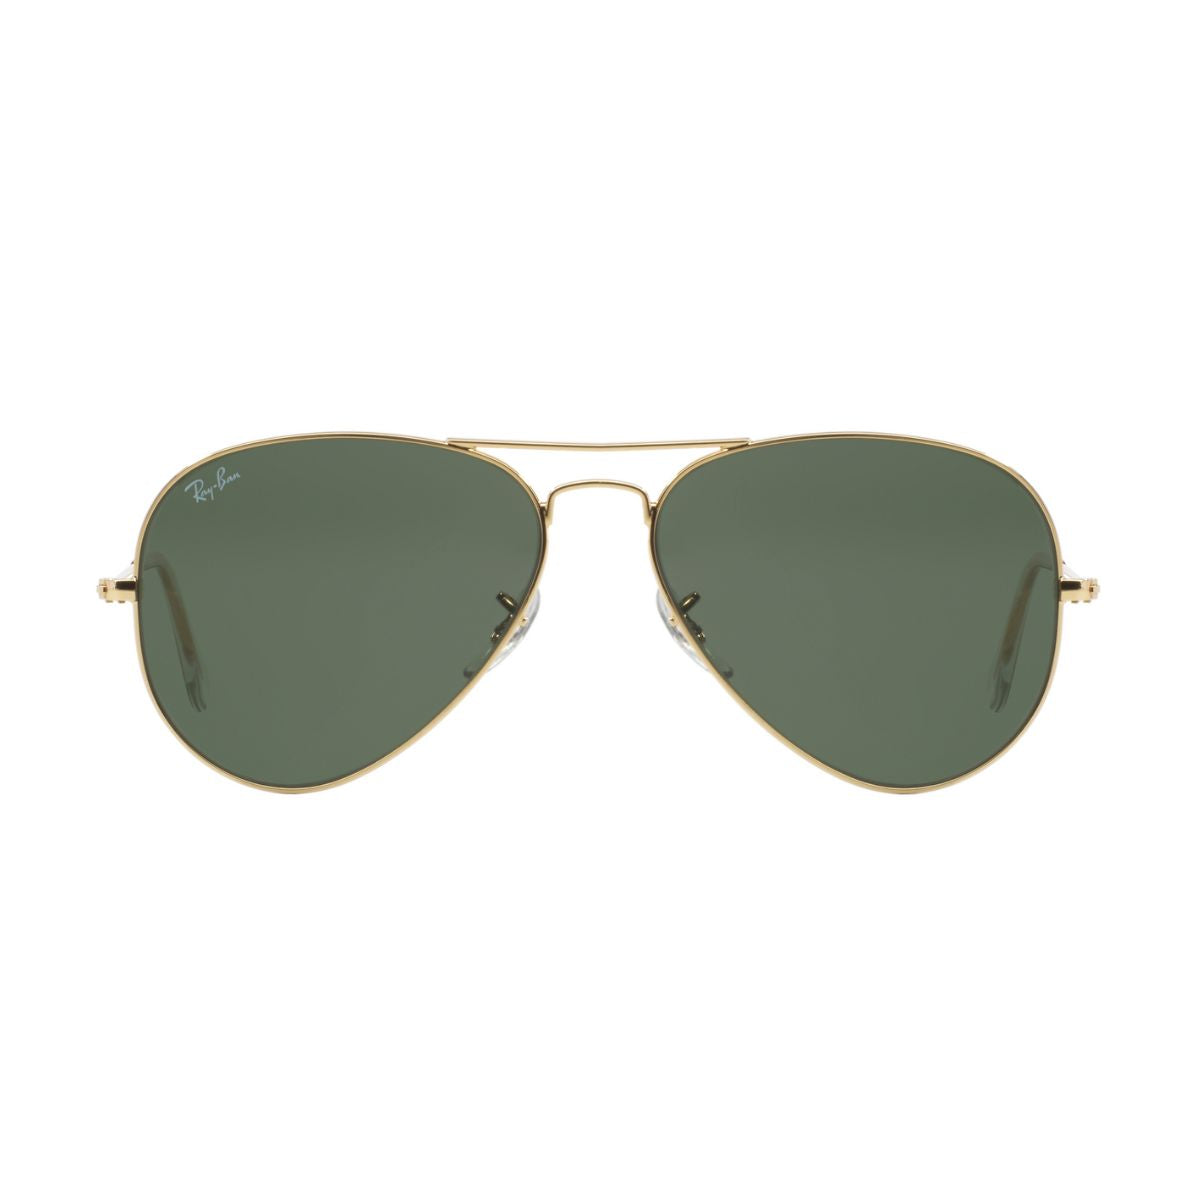 "Rayban 3025 L0205 UV Protection Sunglasses For Men And Women Online At Optorium"